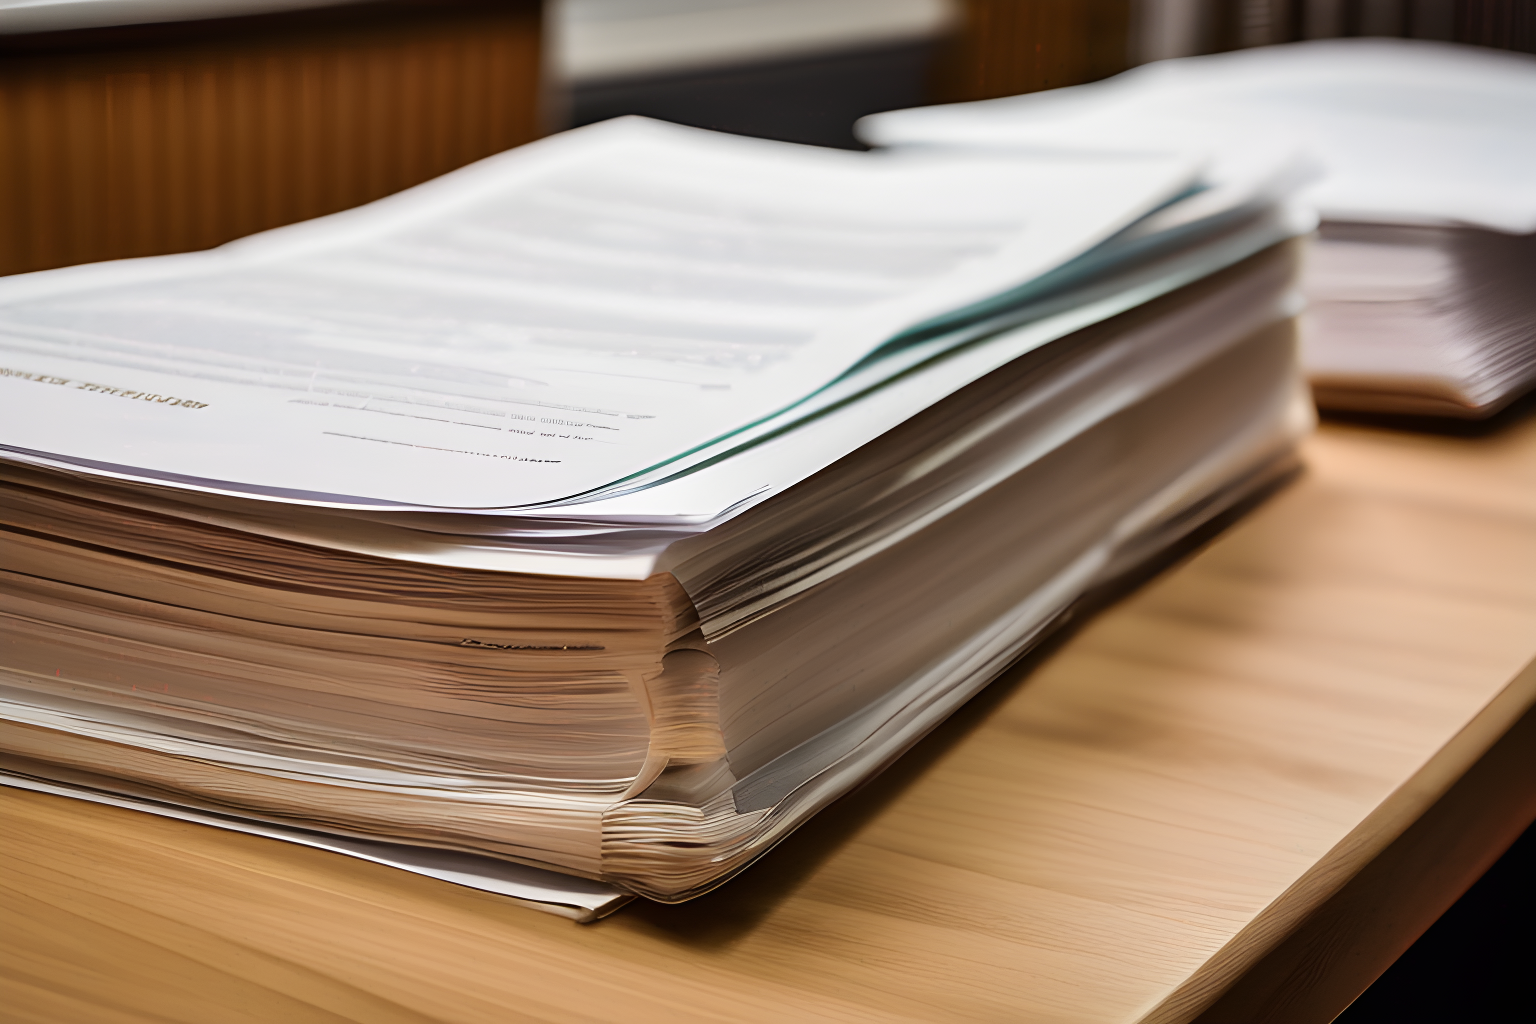 Breathtaking photographs of a stack of legal documents on a desk.